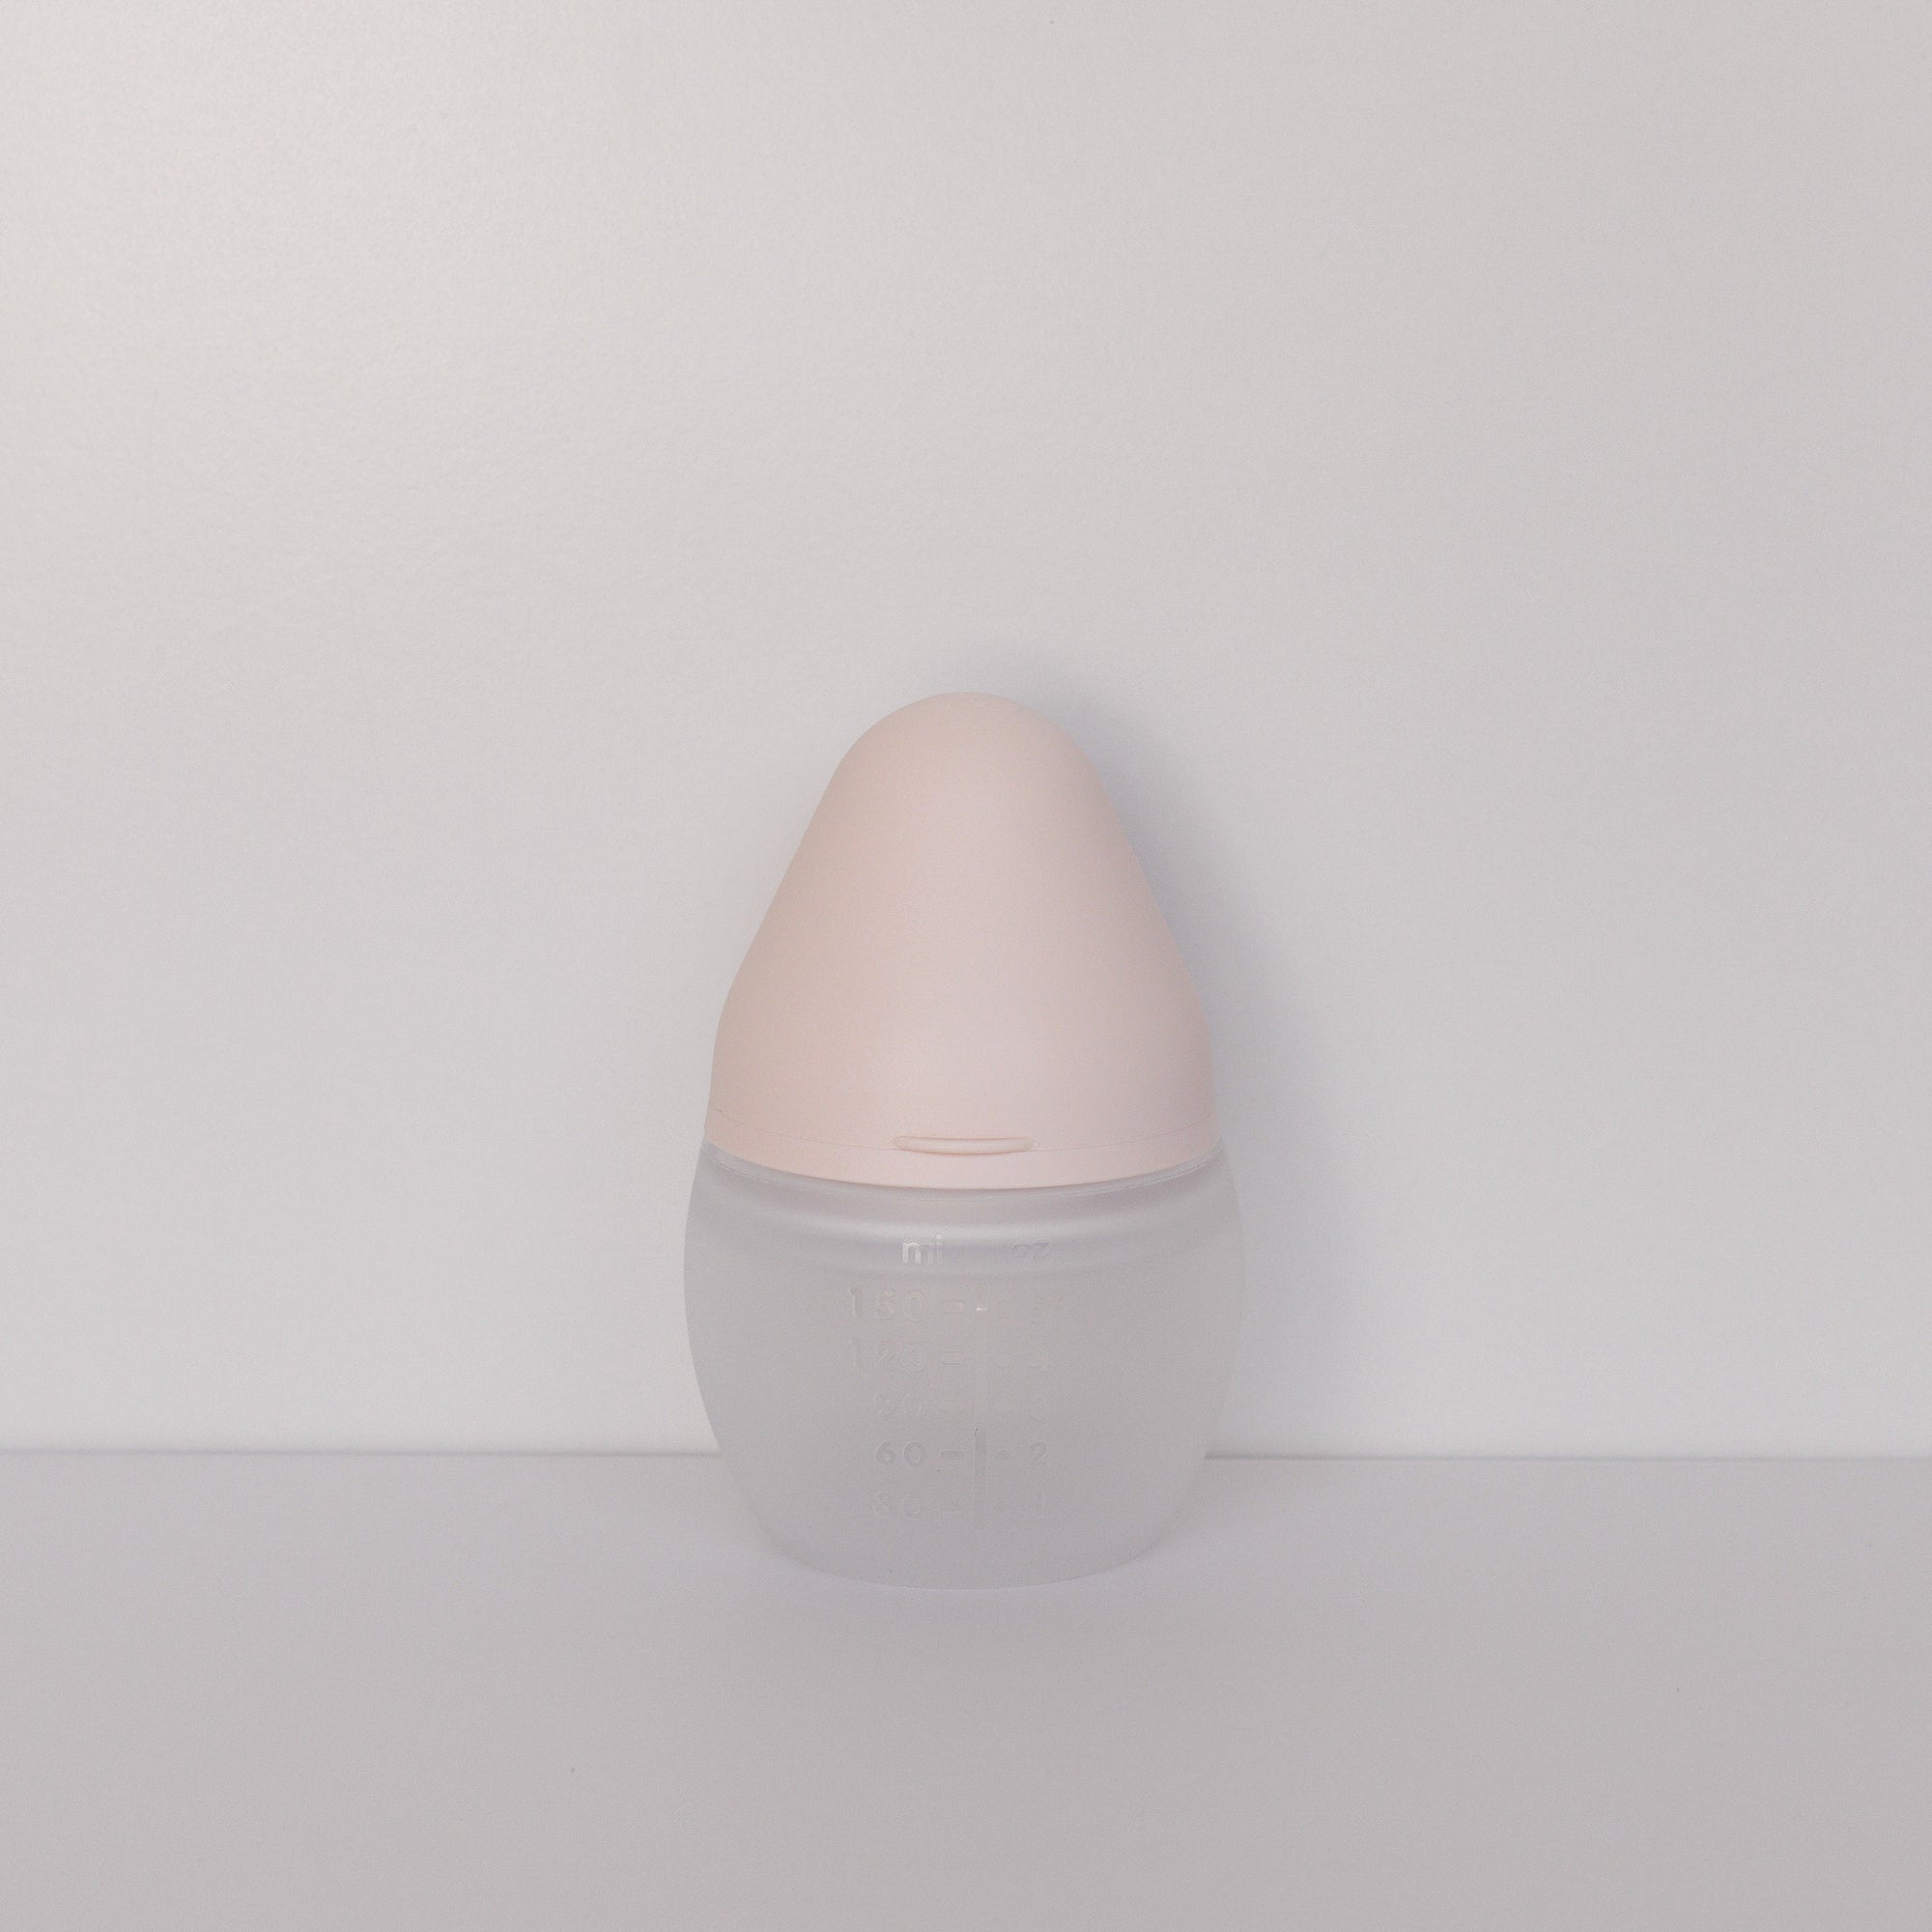 An Elhée France BibRond bottle in the shade nude standing against a white surface.